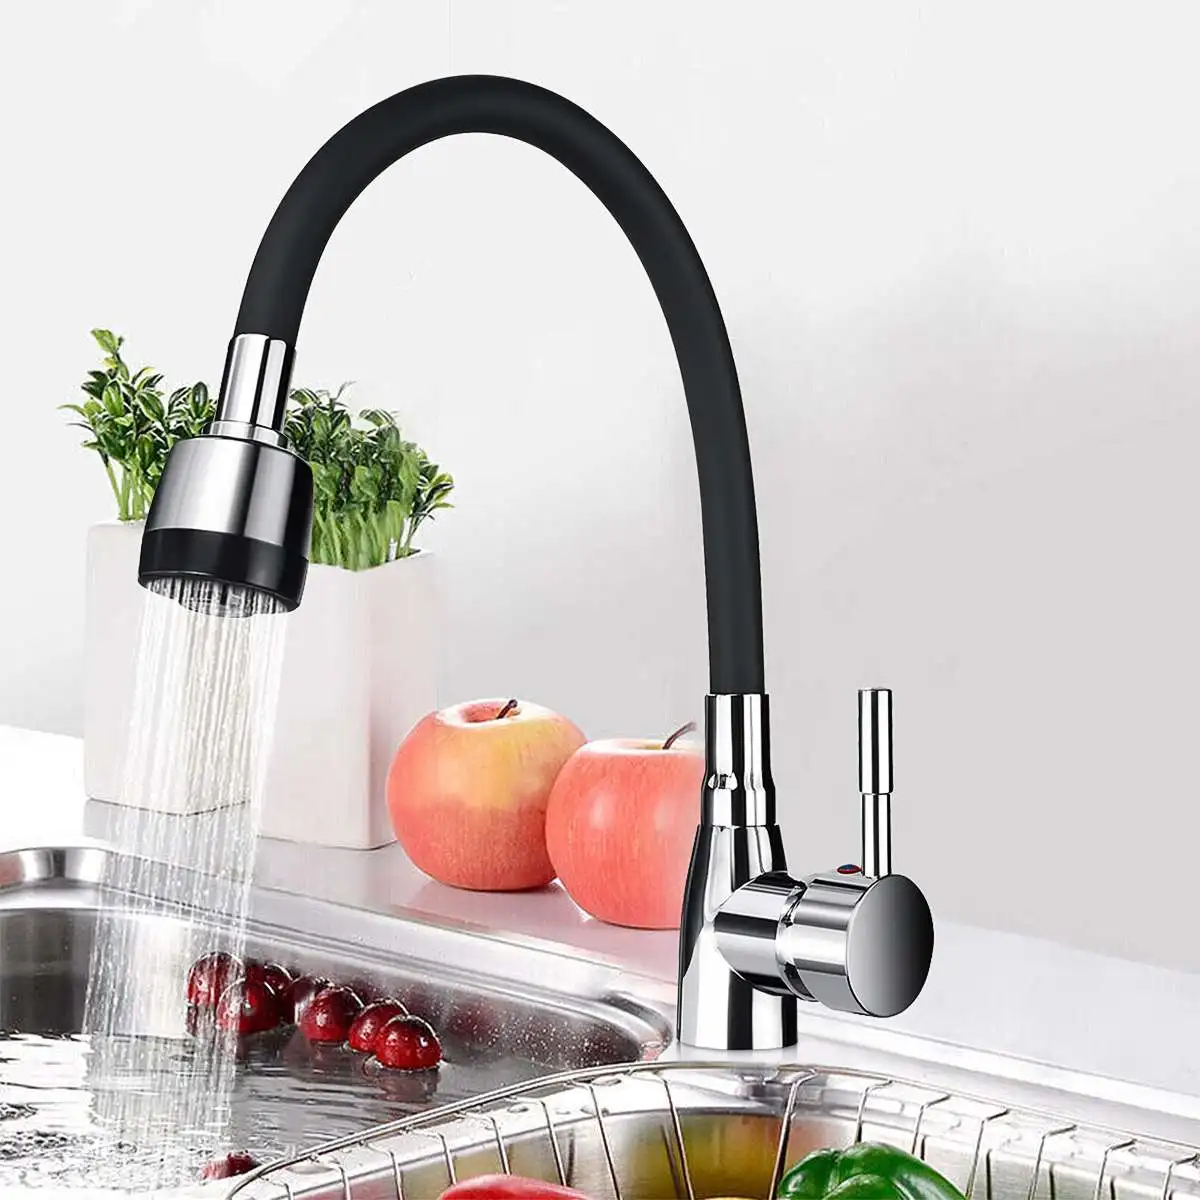 

Black Polished Chrome 360Rotating Single Handle Kitchen Basin Faucet Cold and Hot Water Mixer Tap Torneira Deck Mounted